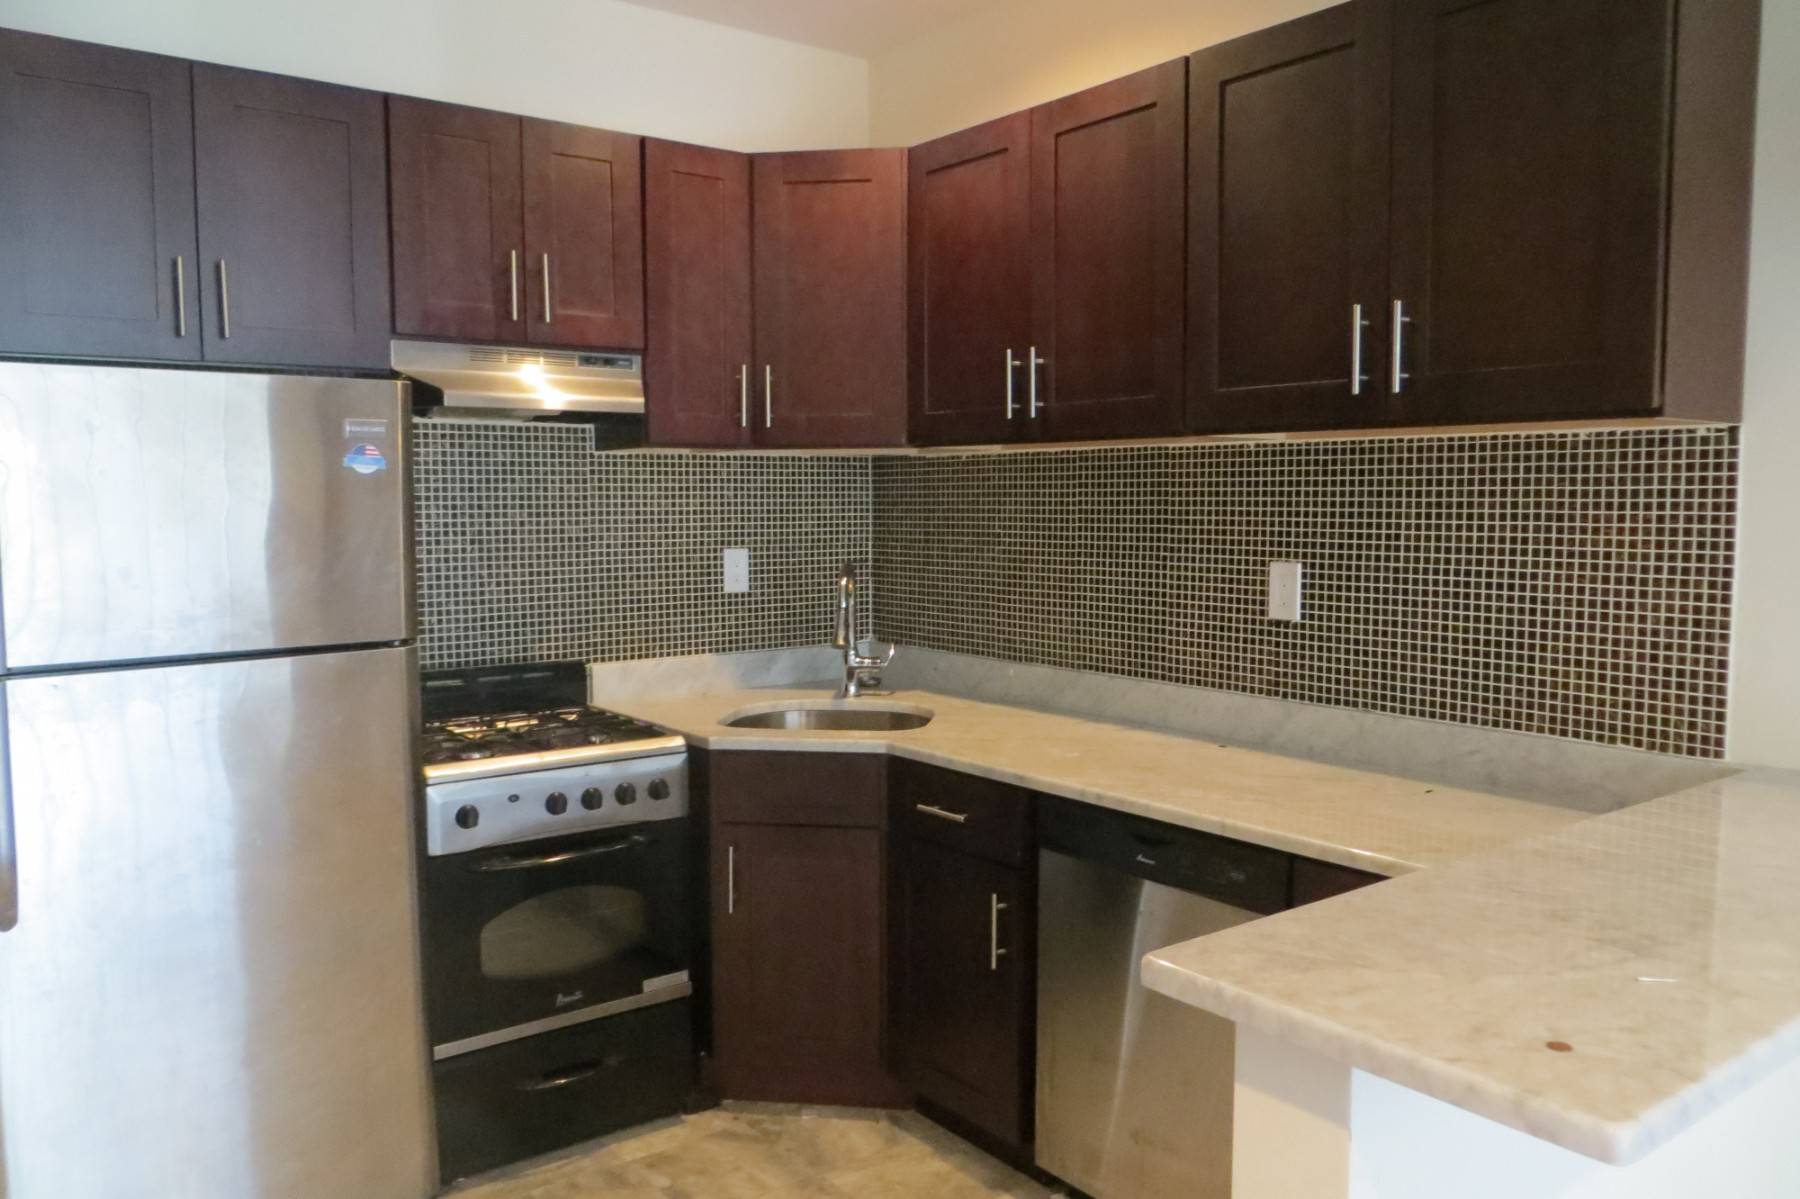 VIRTUAL OPEN HOUSE BY APPOINTMENT Saturday May 30th from 12 1pmLoft like oversized two bedroom one bathroom is located in the sought after East Village.